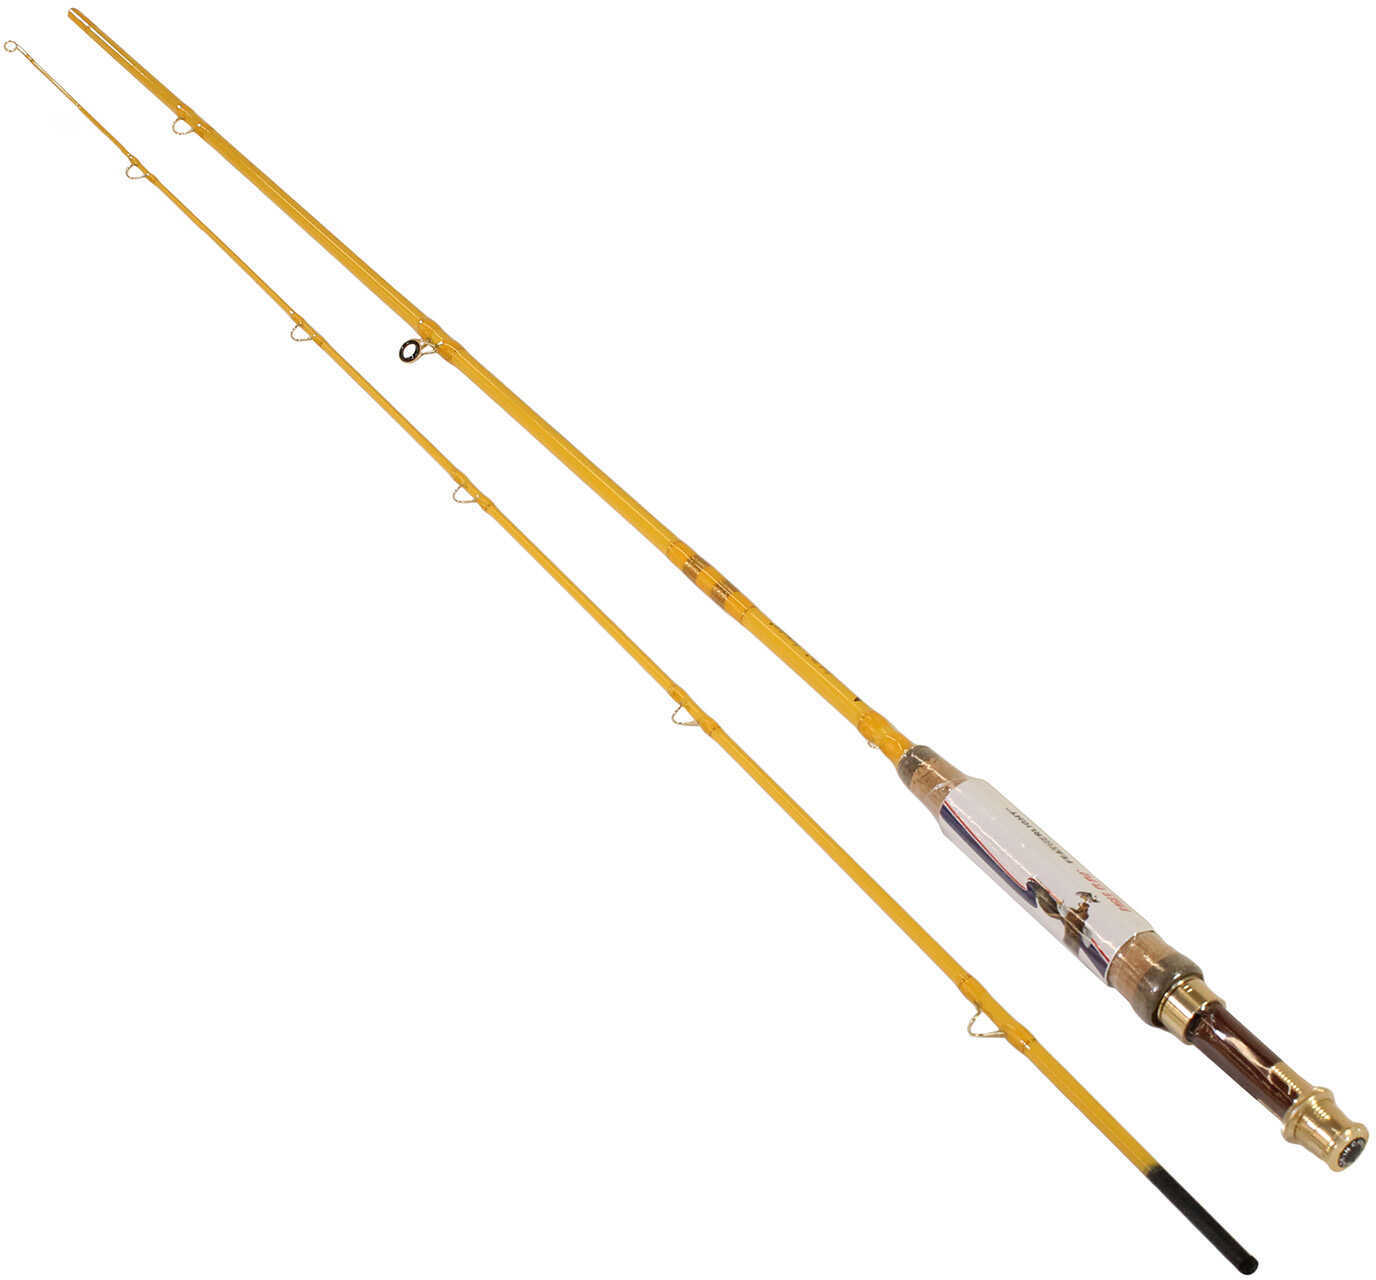 Eagle Claw Featherlight Rod Fly 8ft 5-6Wt 2pc FL300-8